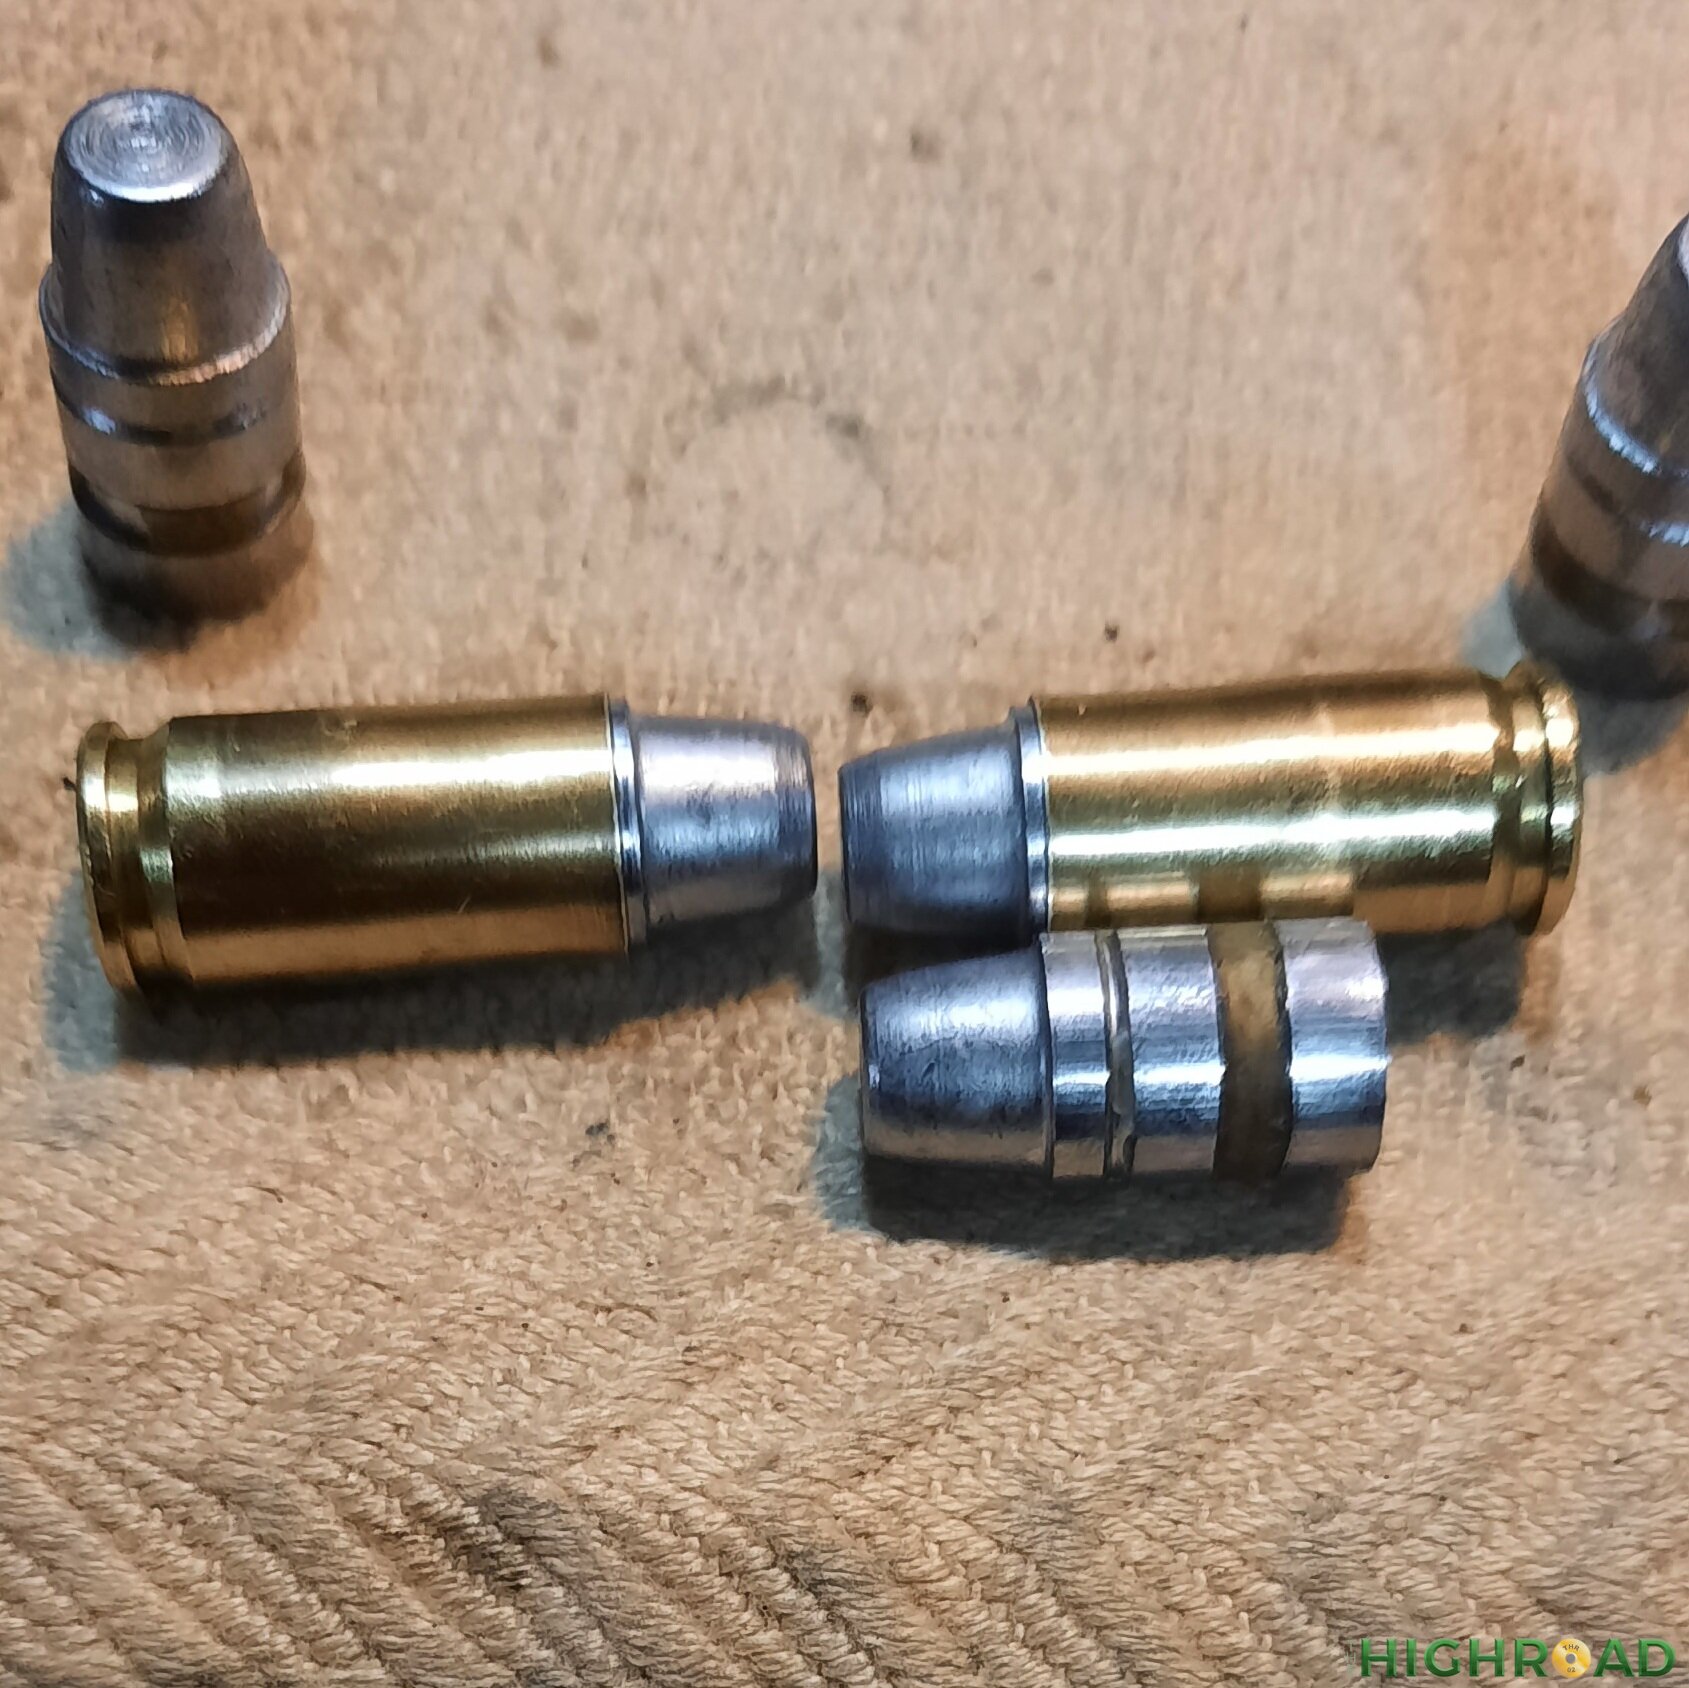 163 gr lswc in 9mm not recommended .